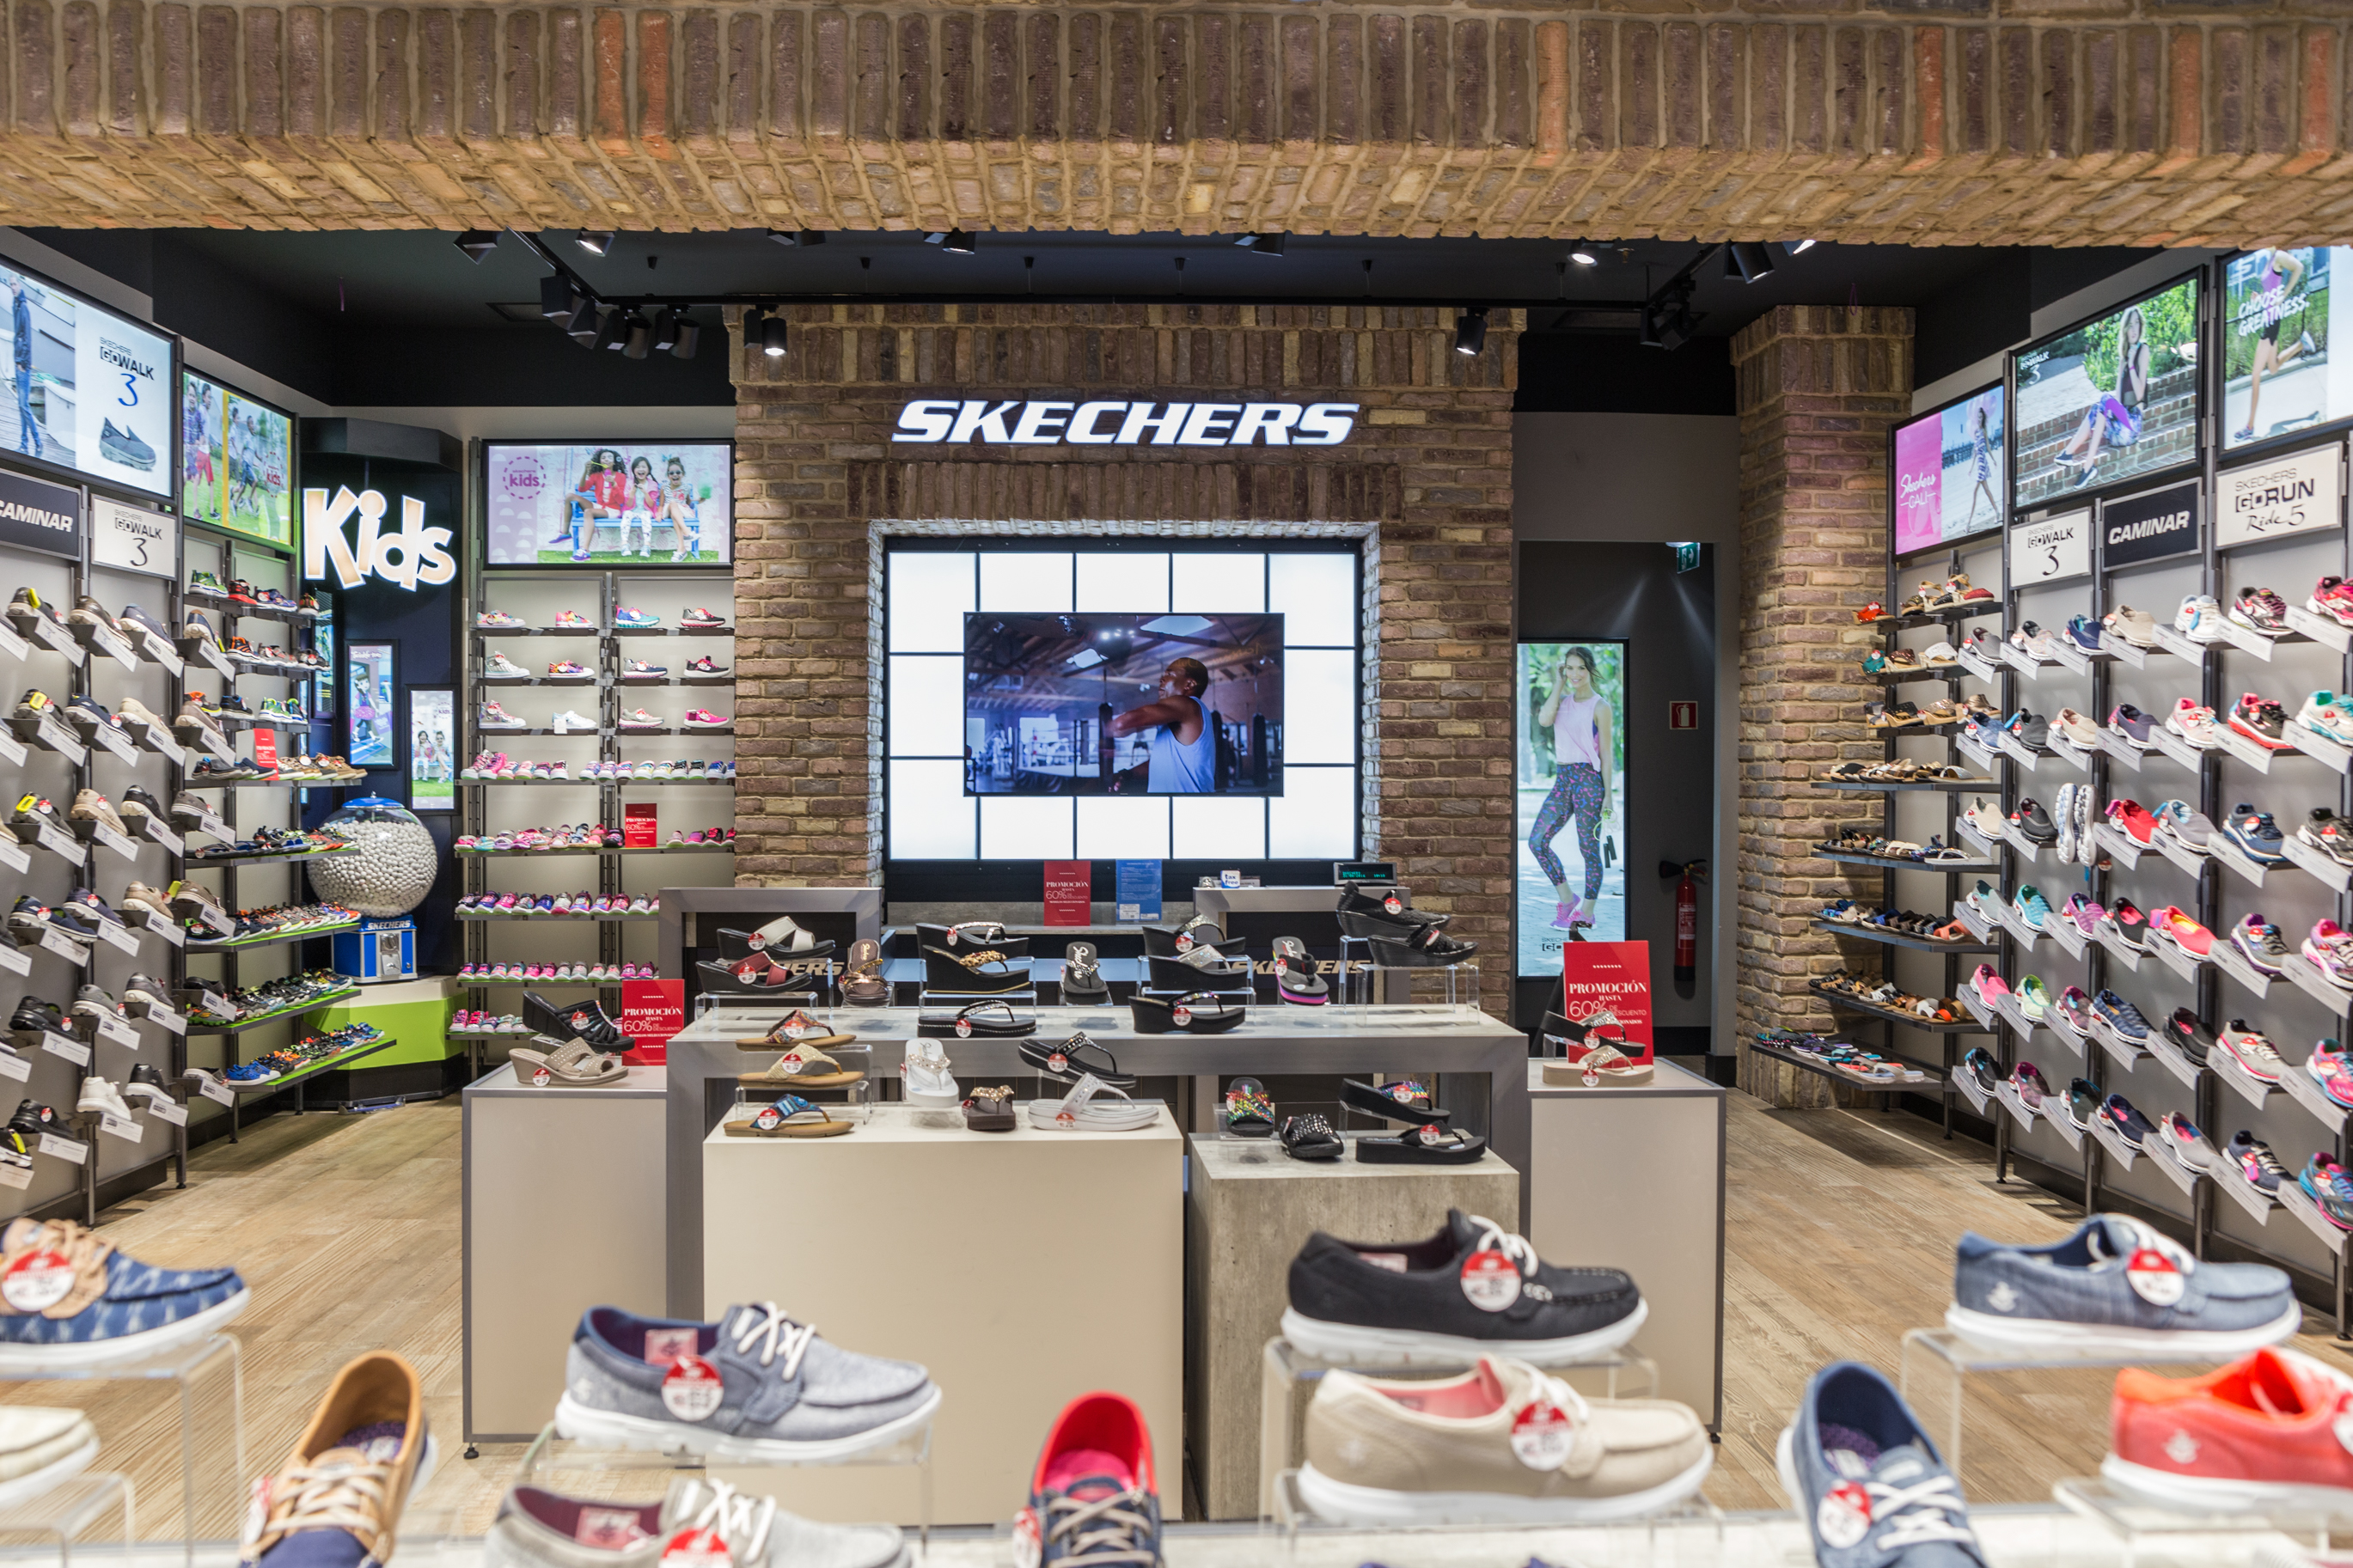 skechers shoes new arrival 2016